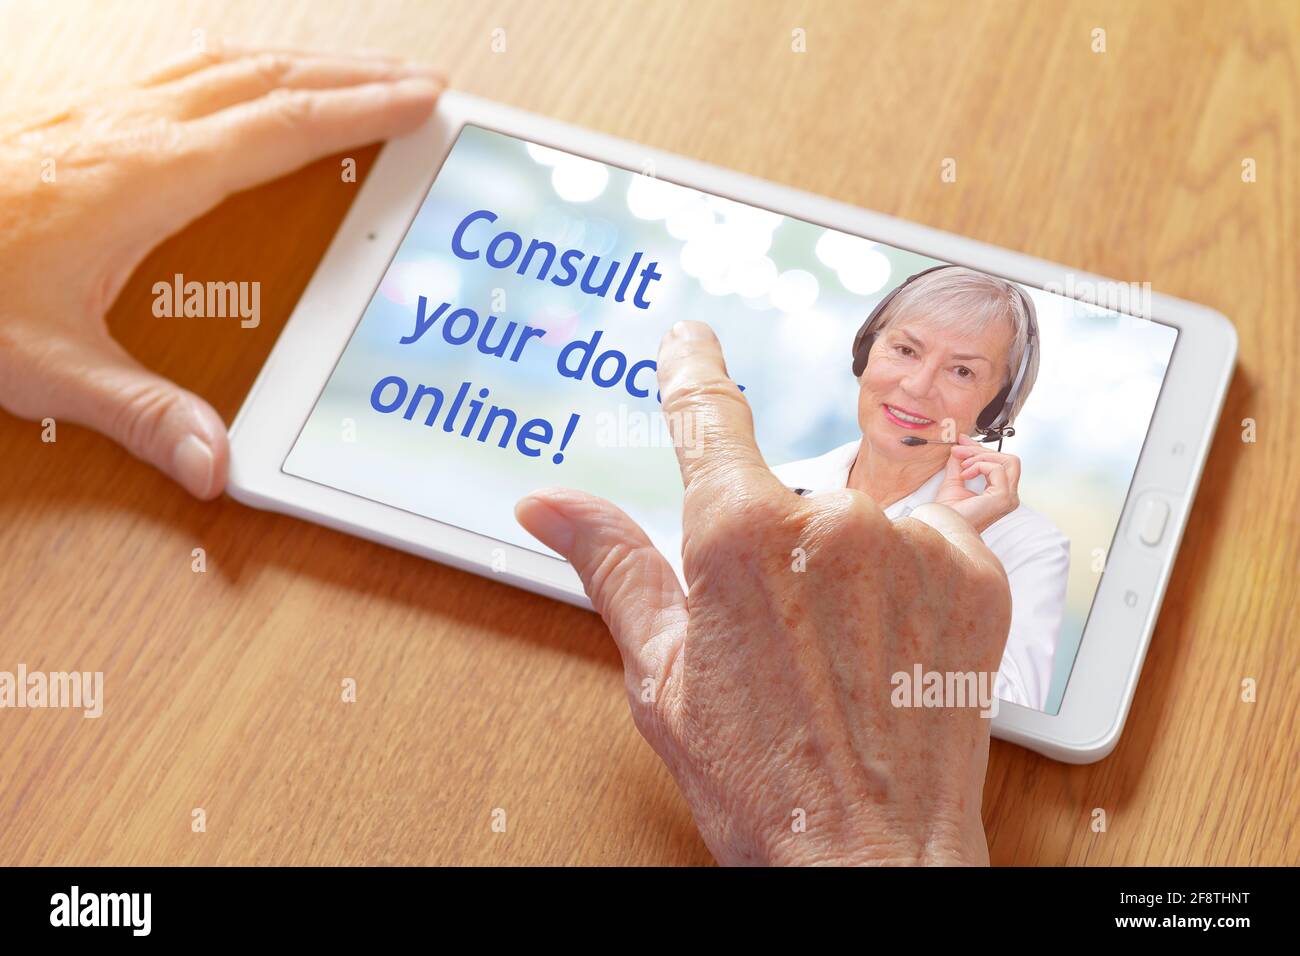 Hands touching a tablet pc with a tele consultation app, showing a senior physician with headset and the text: consult your doctor online. Stock Photo